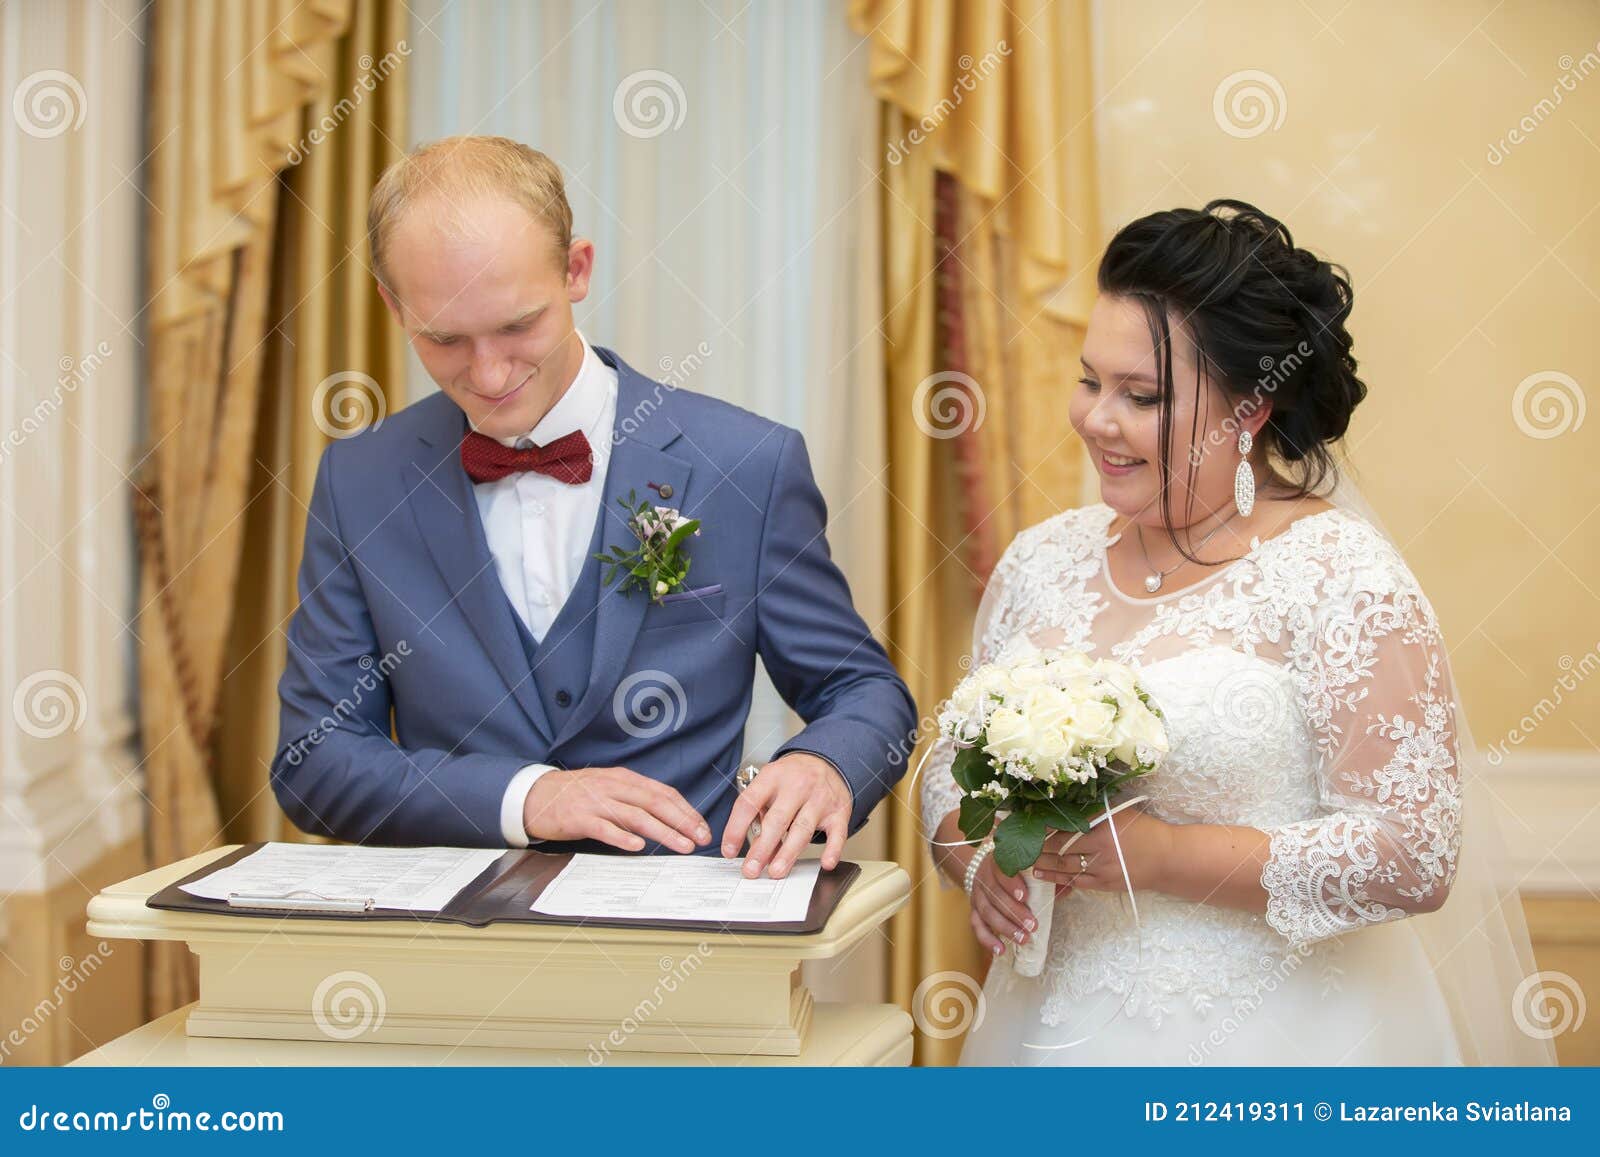 Russian Wedding Ceremony In The Registry Office Stock